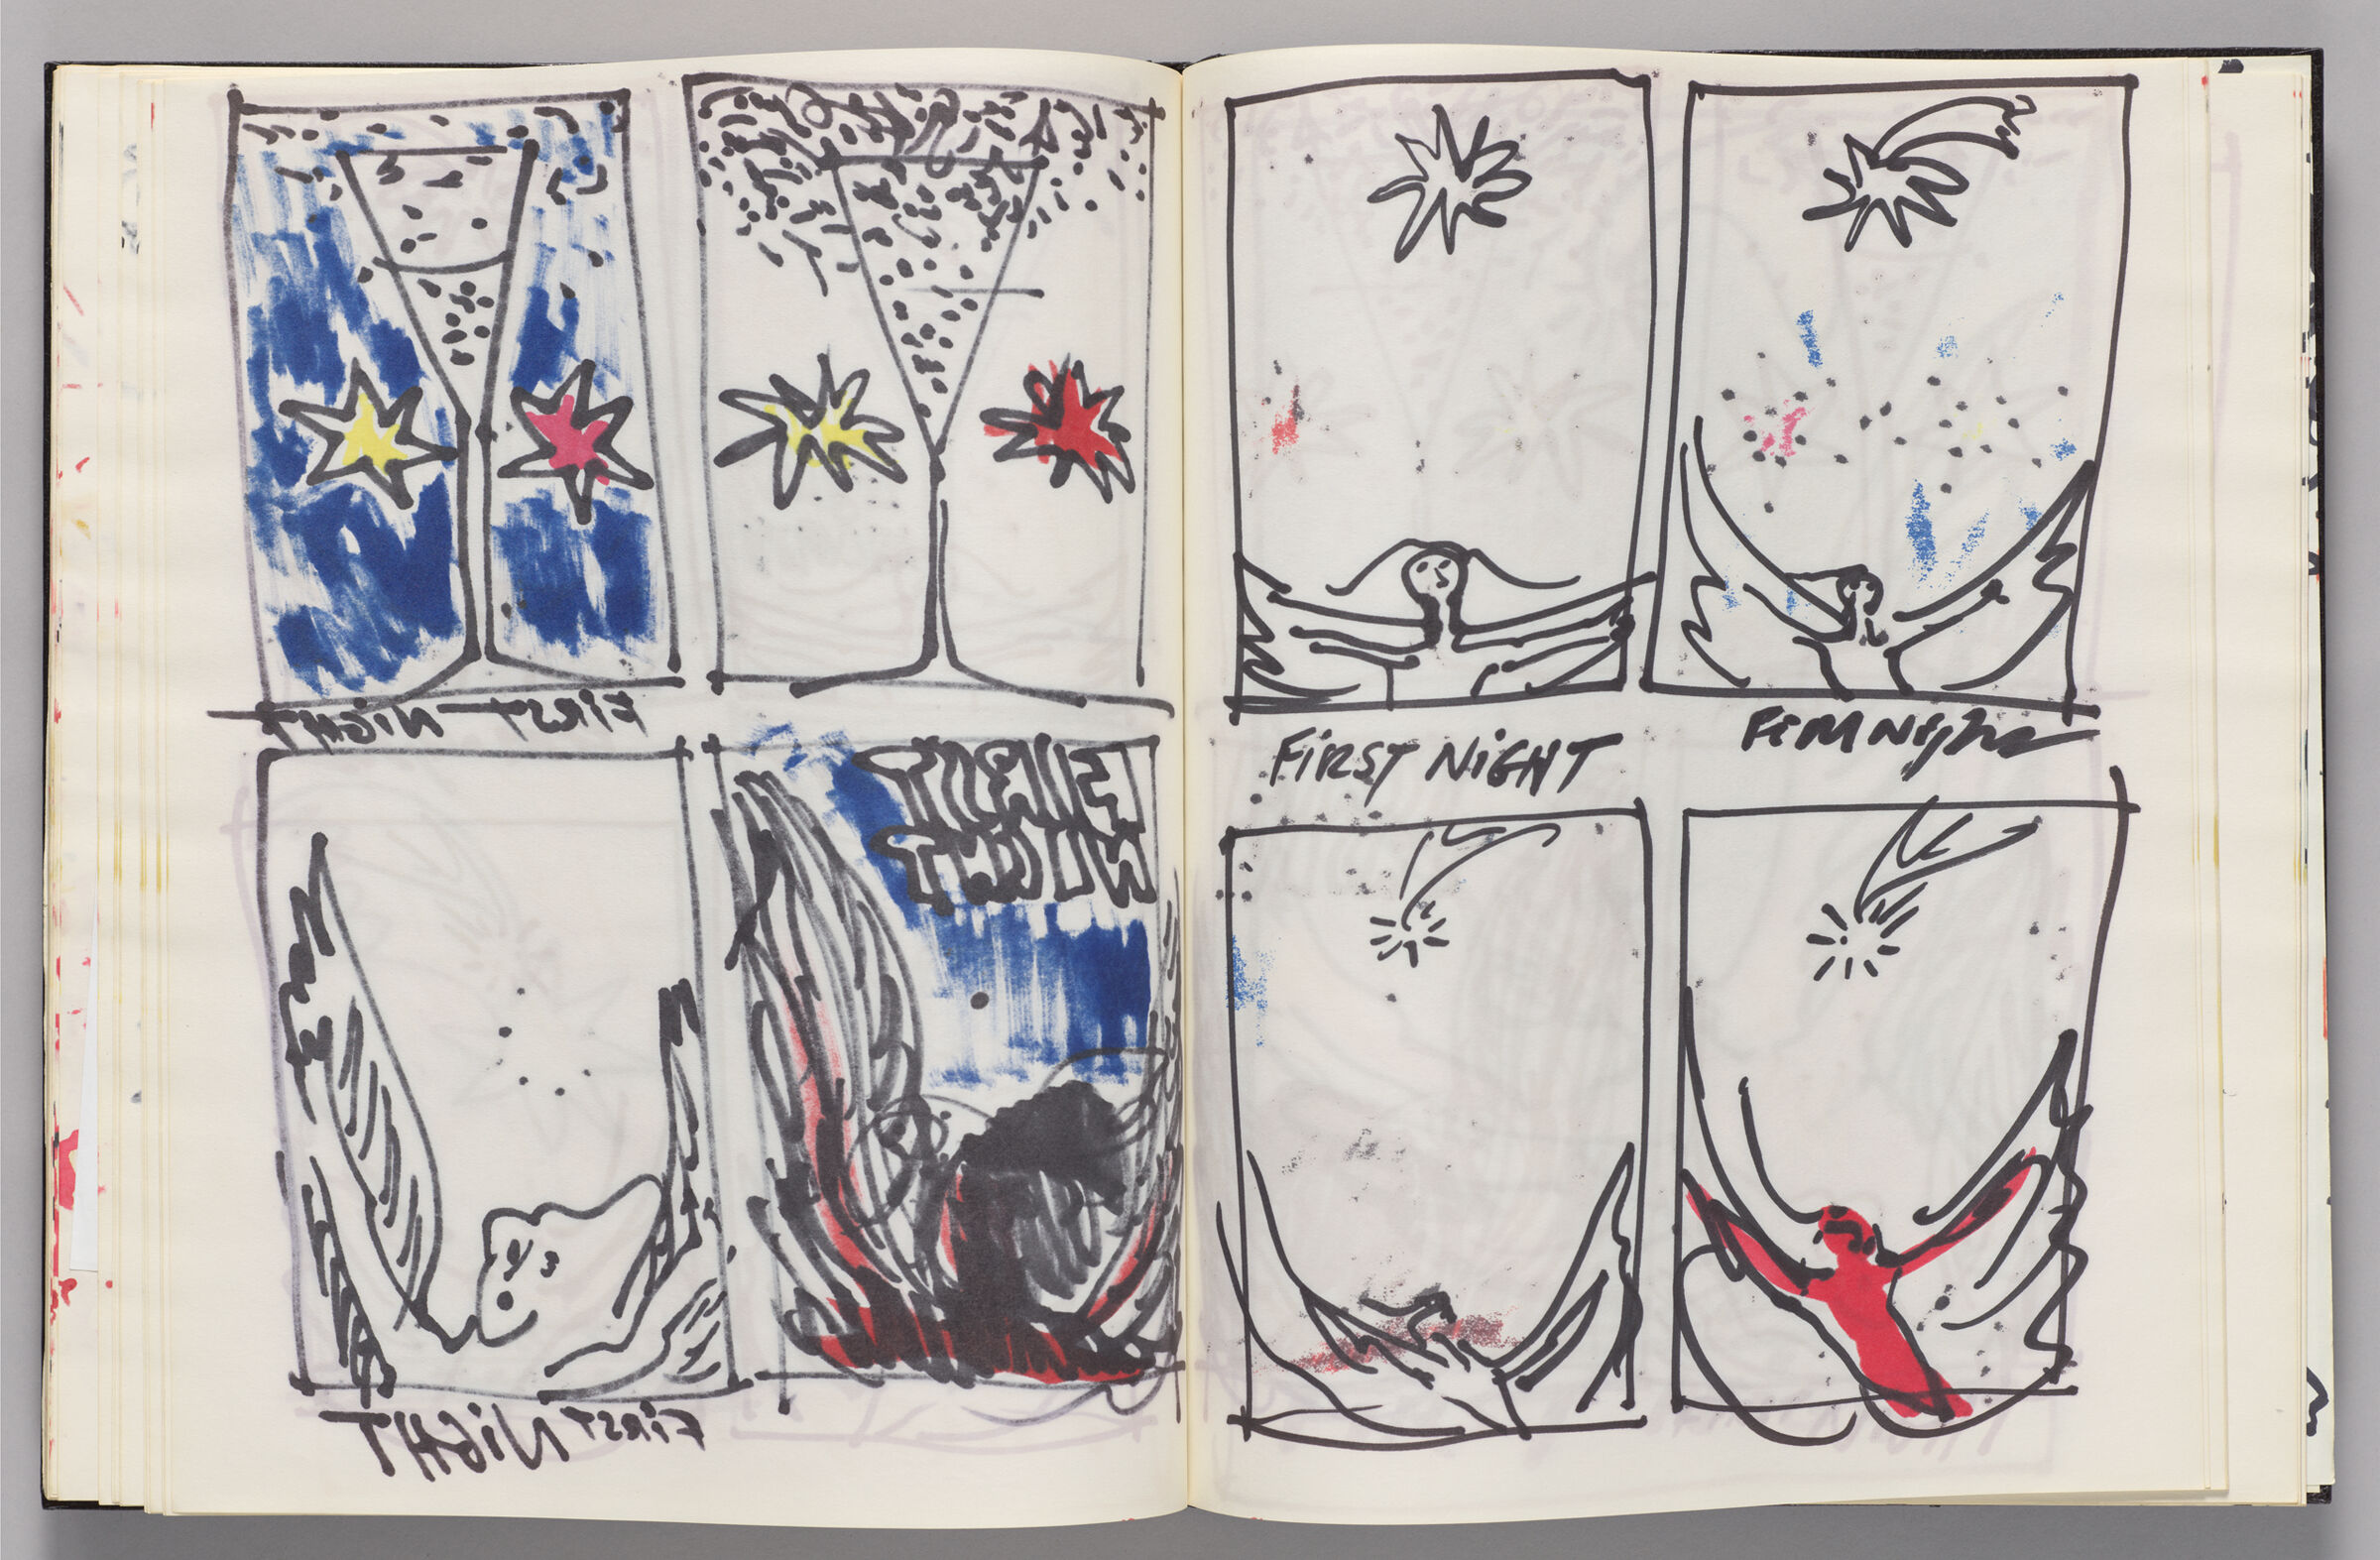 Untitled (Bleed-Through Of Previous Page, Left Page); Untitled (Four Designs For First Night Posters, Right Page)